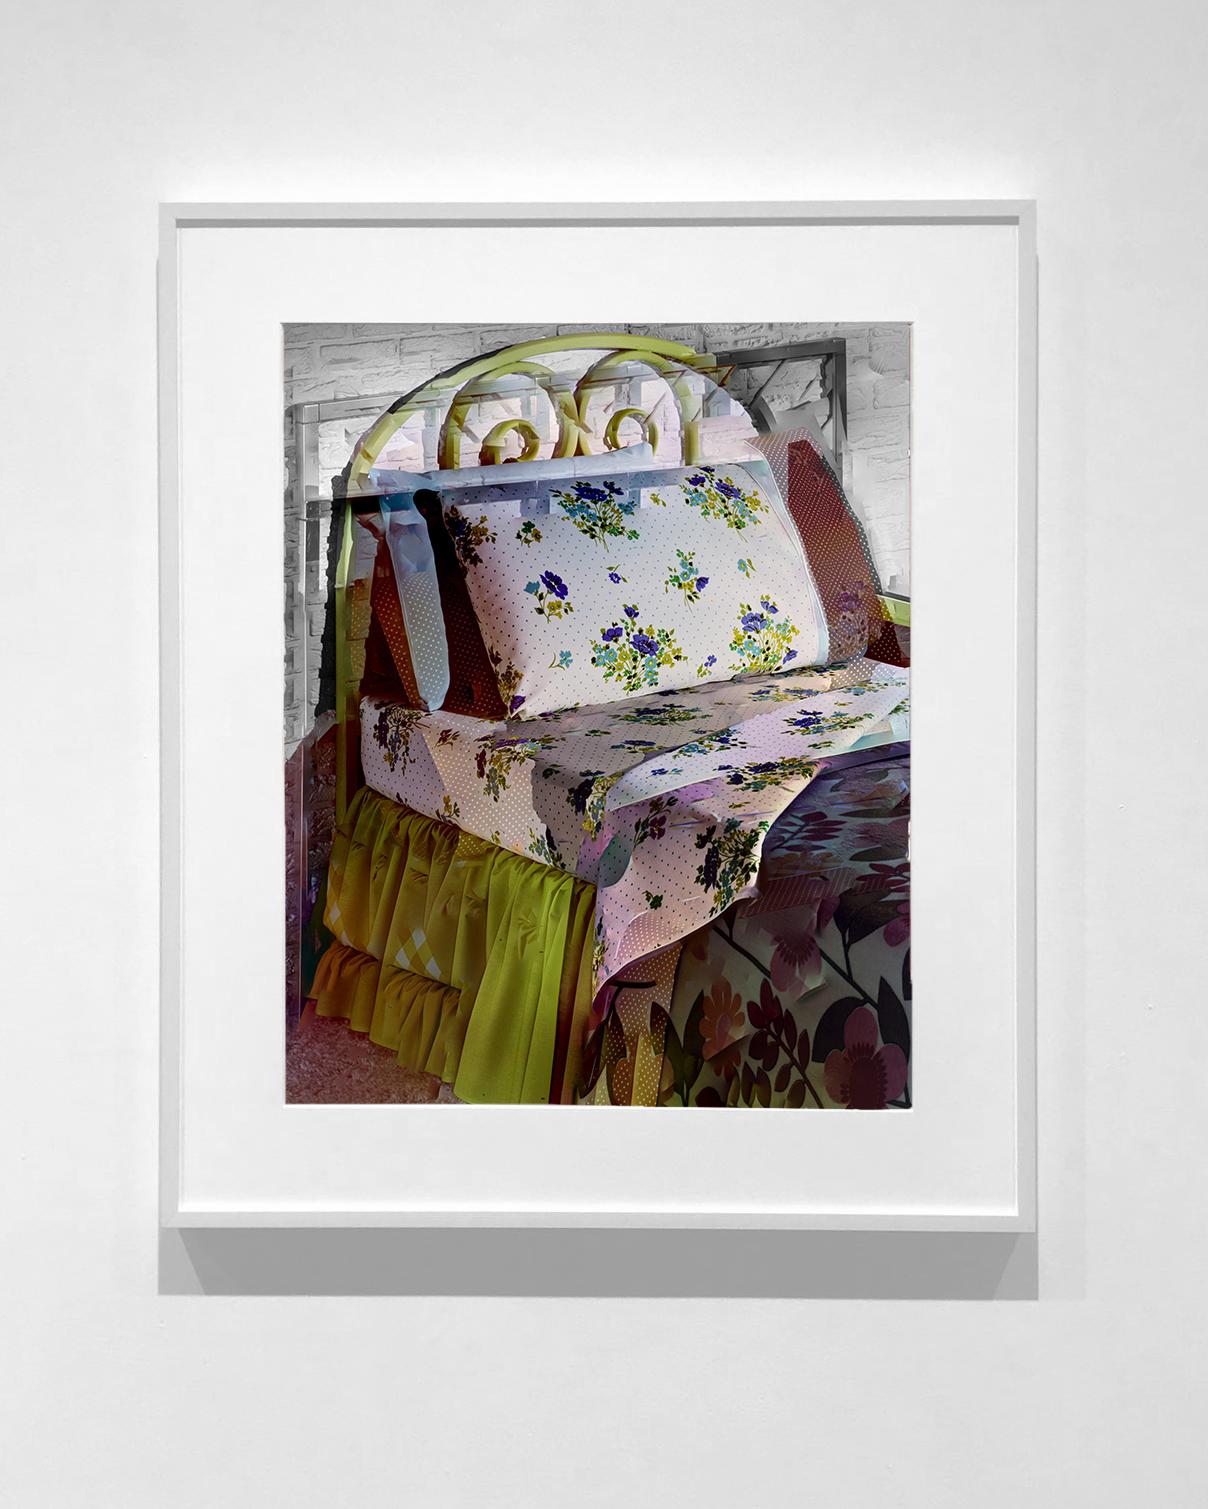 Dwelling #2, Contemporary Color Photography, 30 x 24 Inches - Black Still-Life Photograph by Matthew Cronin